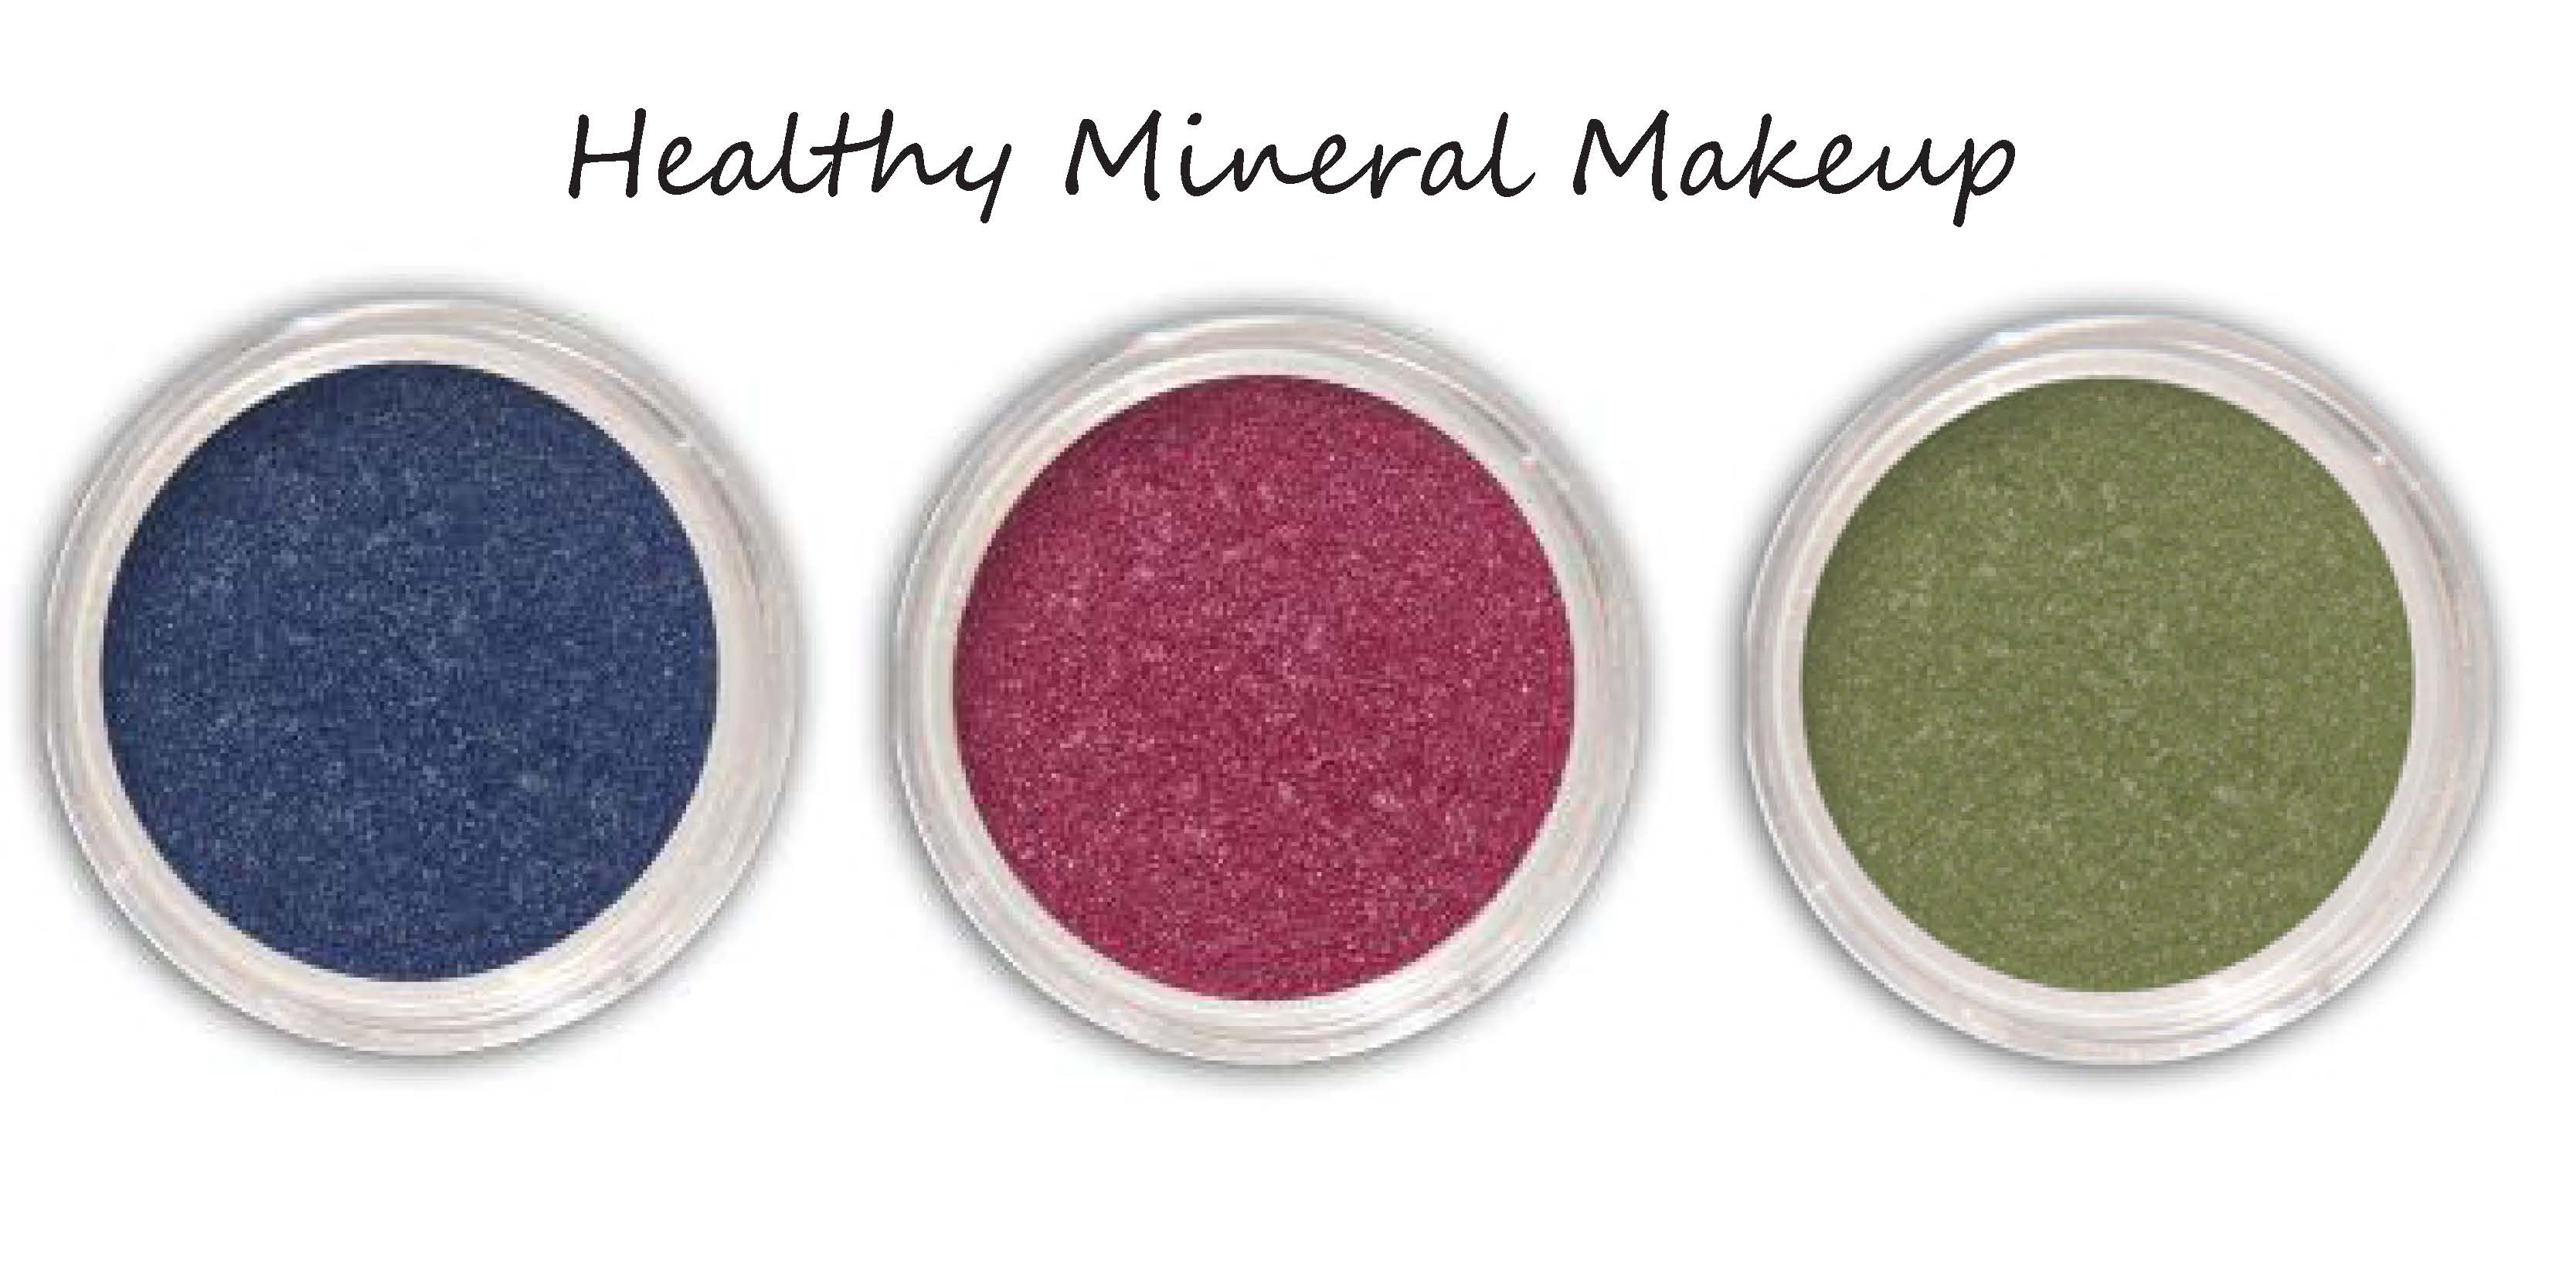 http://wellness-spring.org/wp-content/uploads/2017/10/home-page-Mineral-Makeup2.jpg